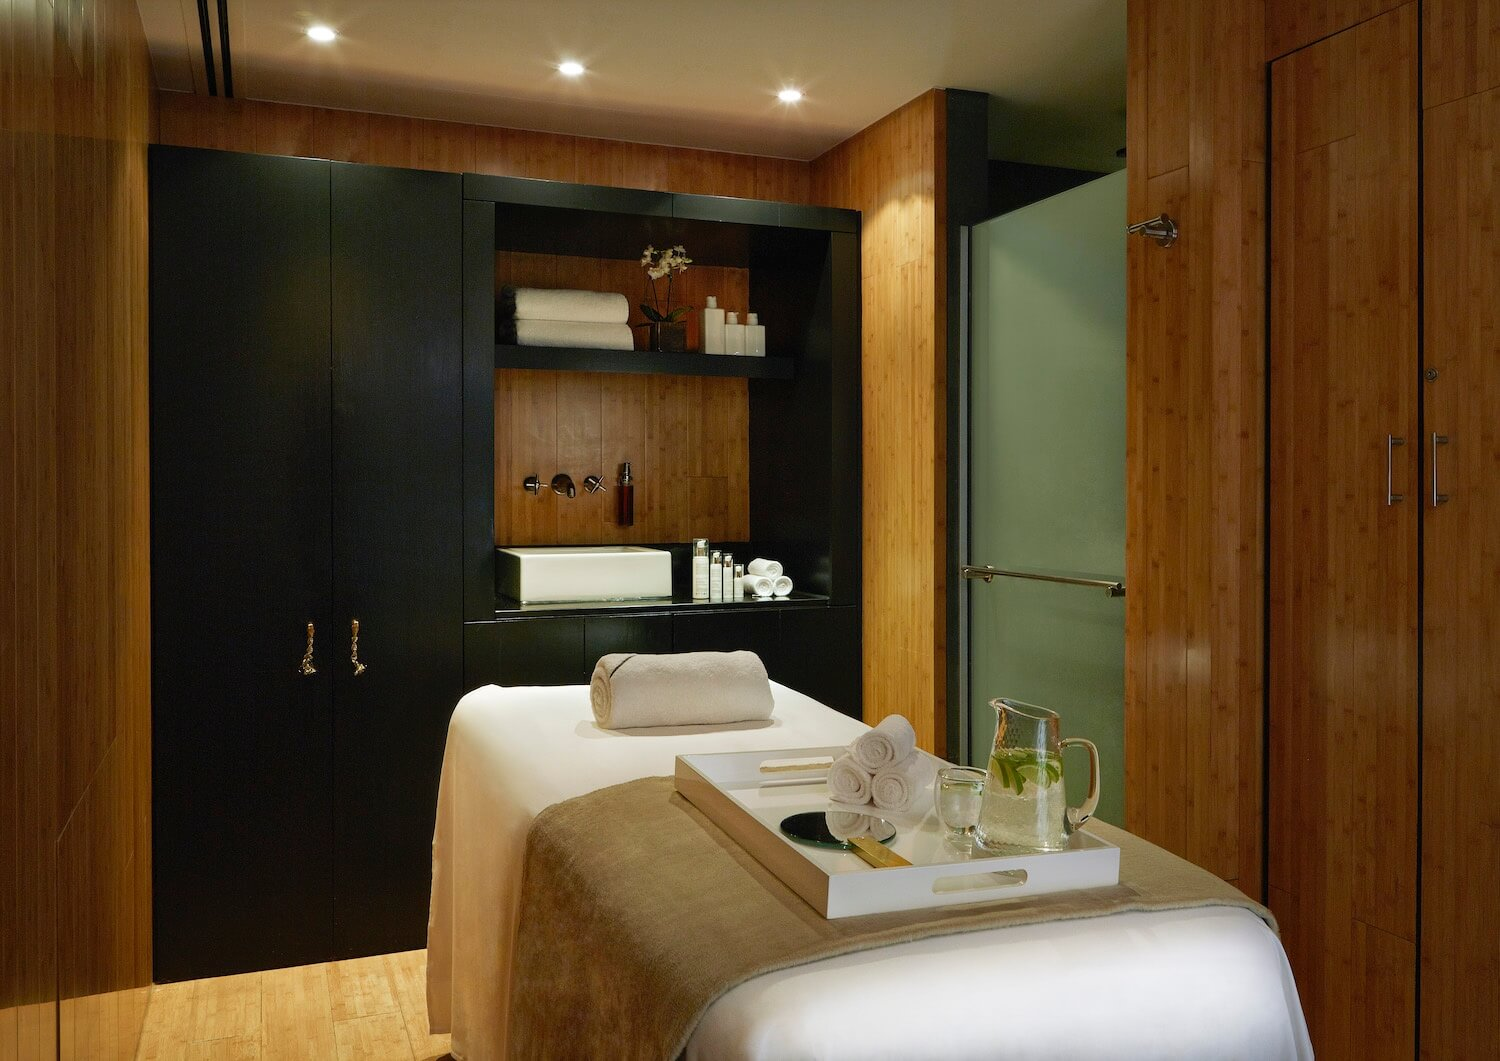 Massage table in a wooden-clad treatment room at the Rosewood hotel spa in London